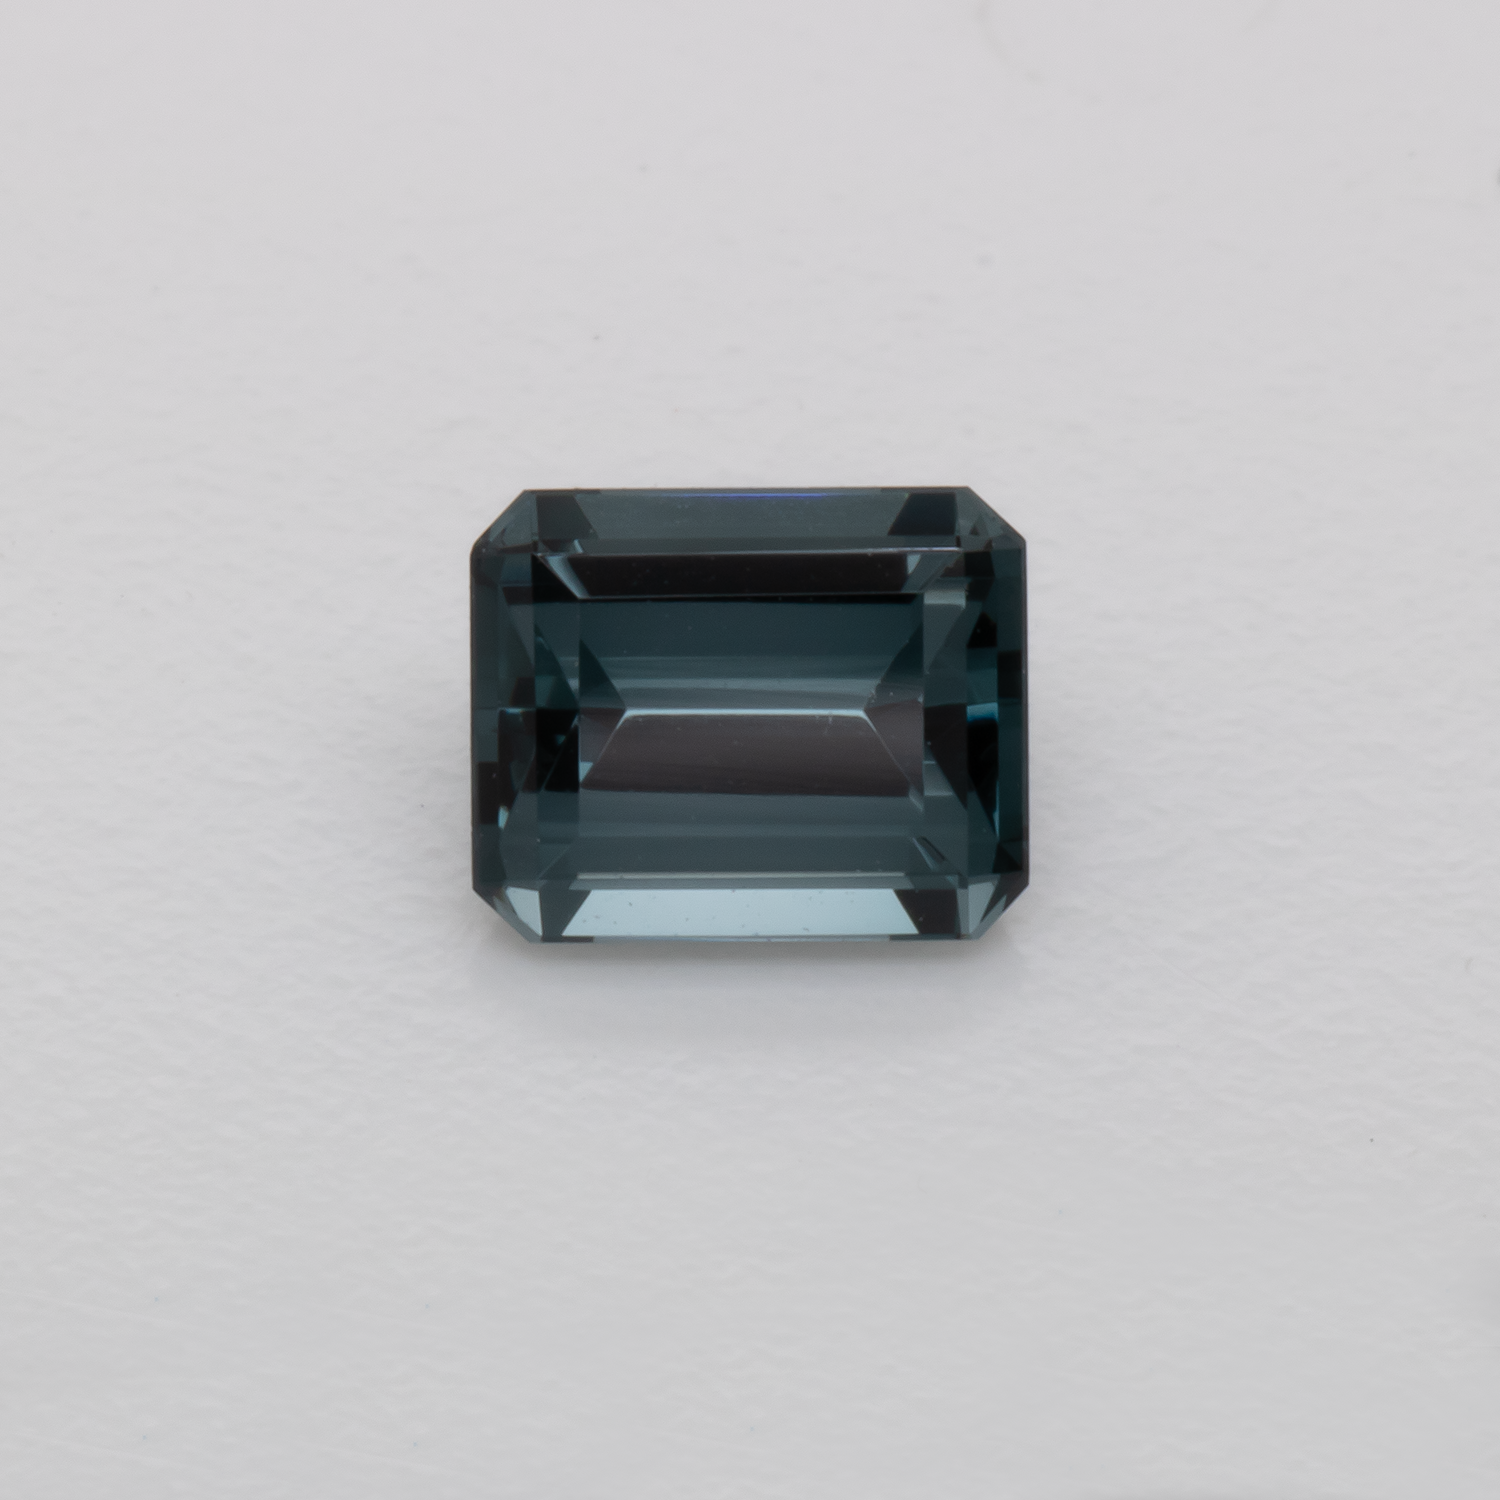 Spinel - grey, octagon, 5.6x4.5 mm, 0.75 cts, No. SP90054